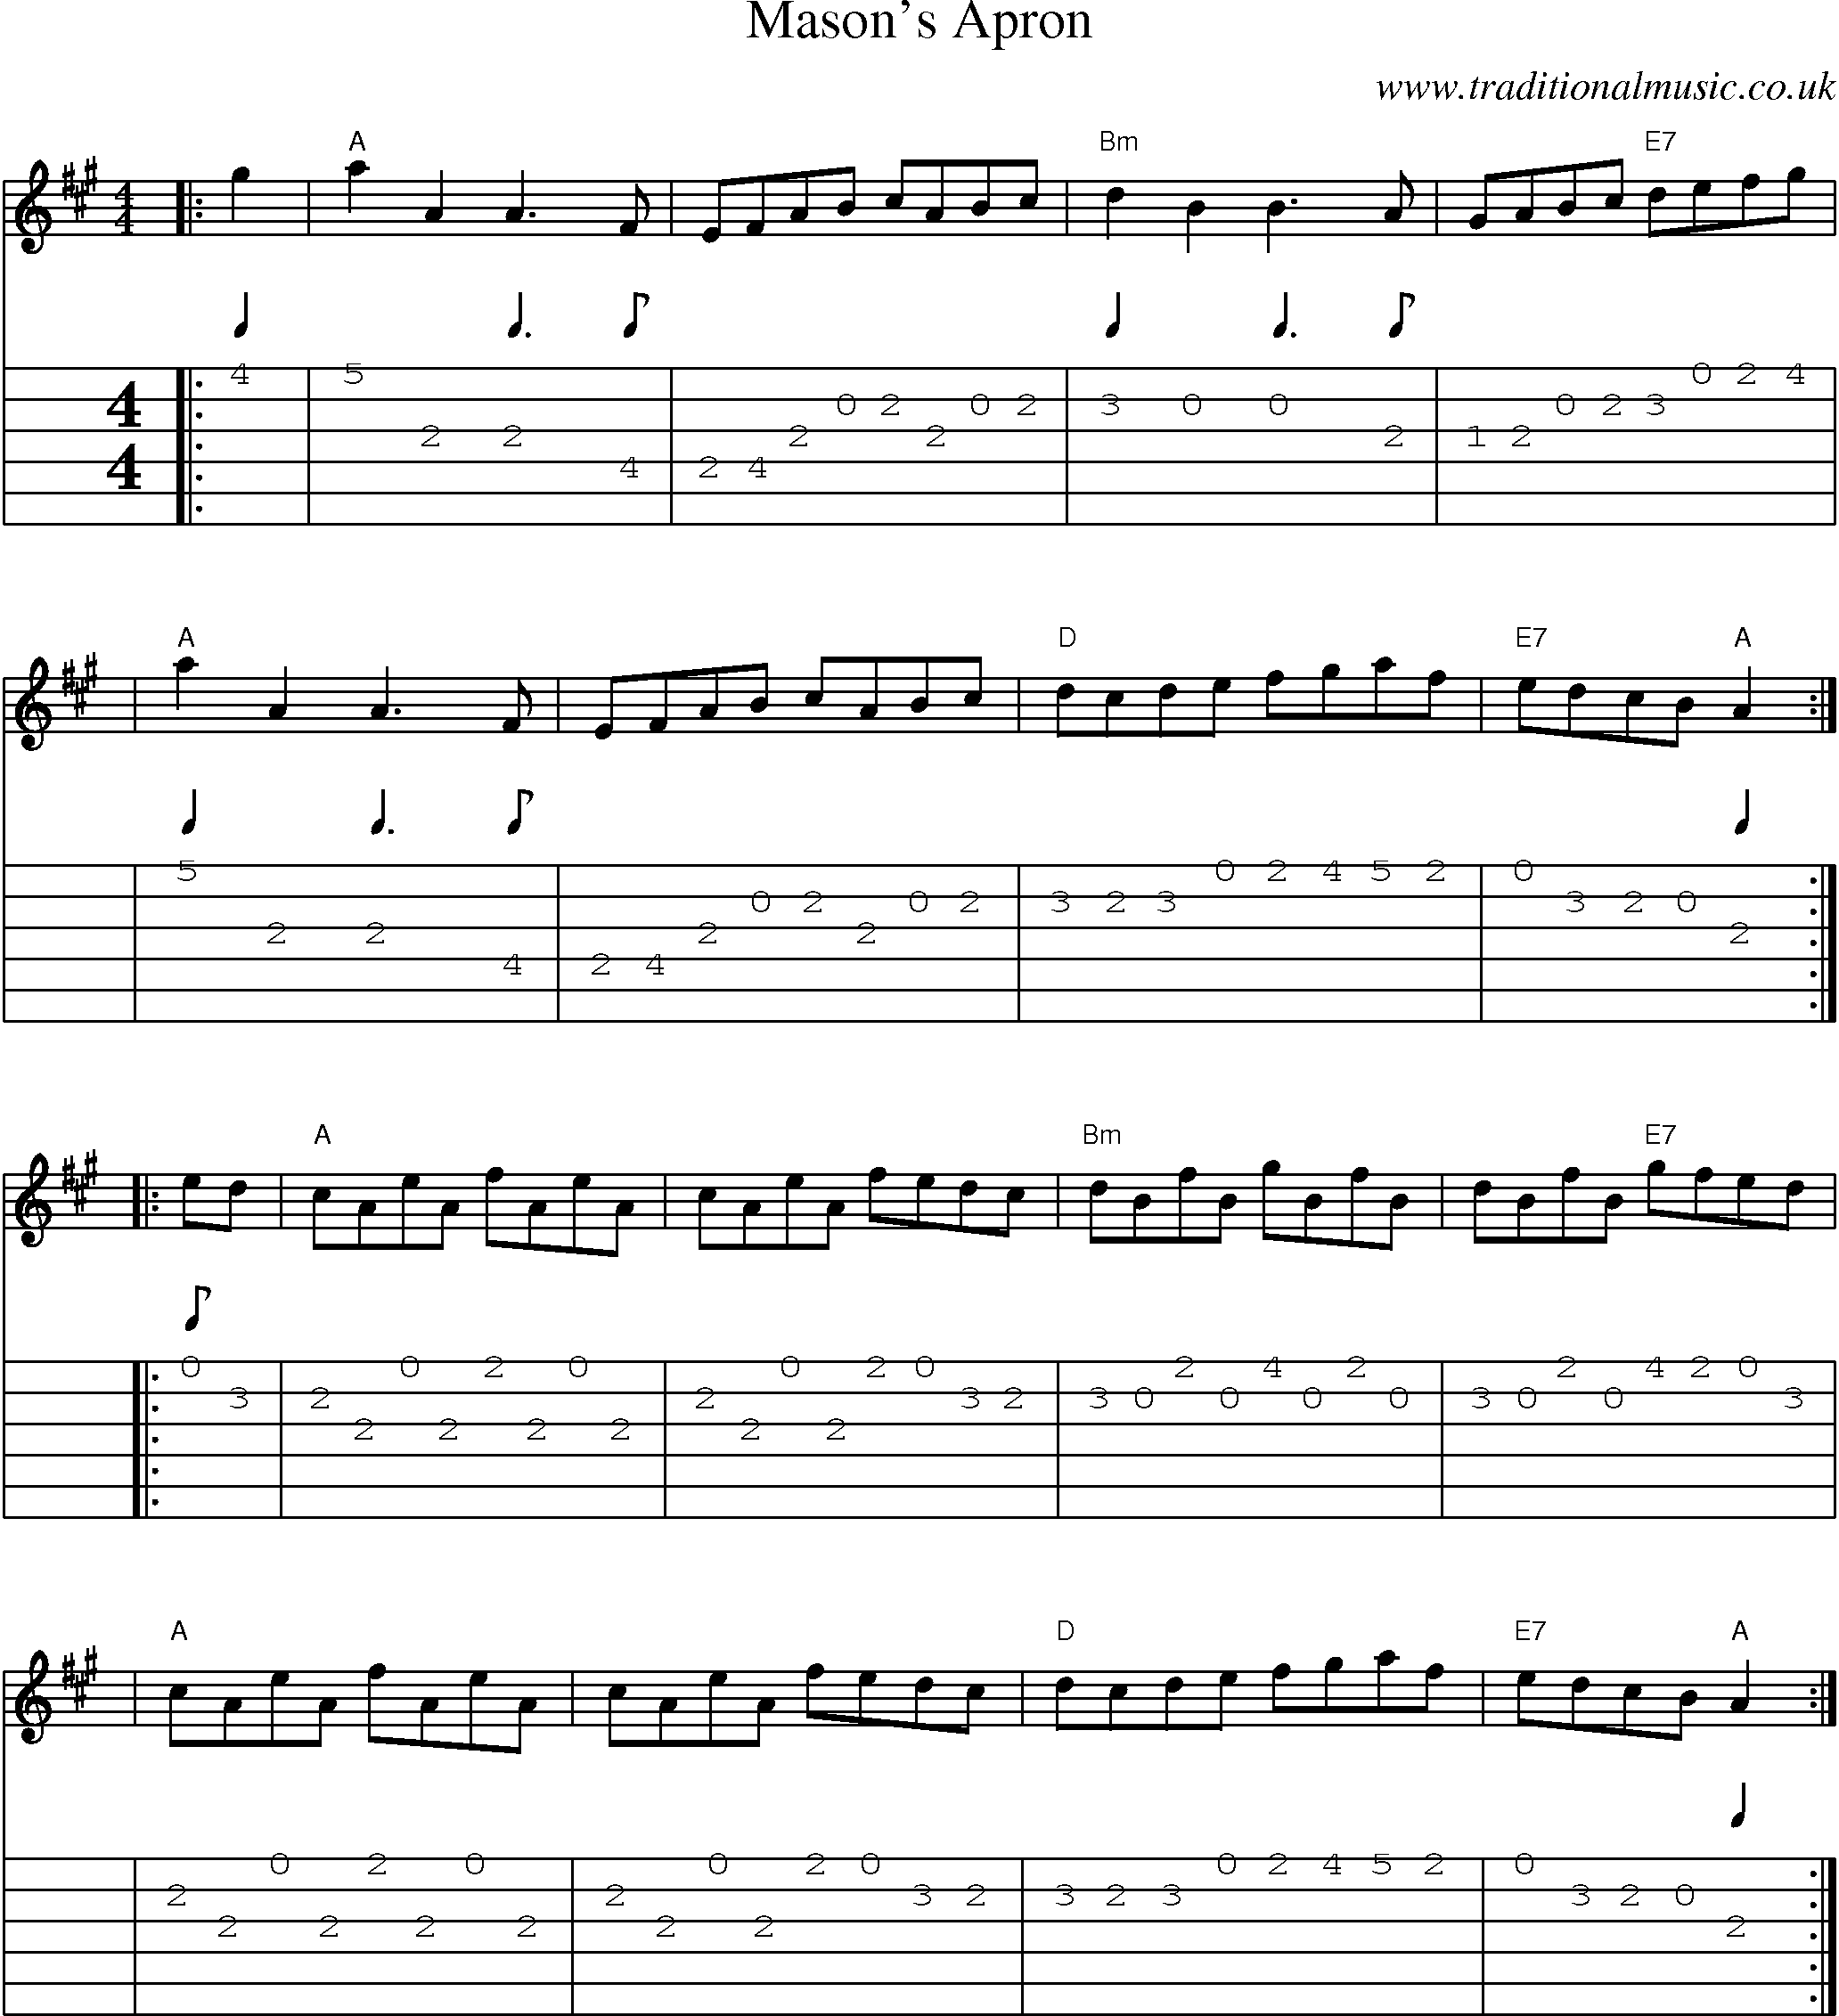 Music Score and Guitar Tabs for MASONS